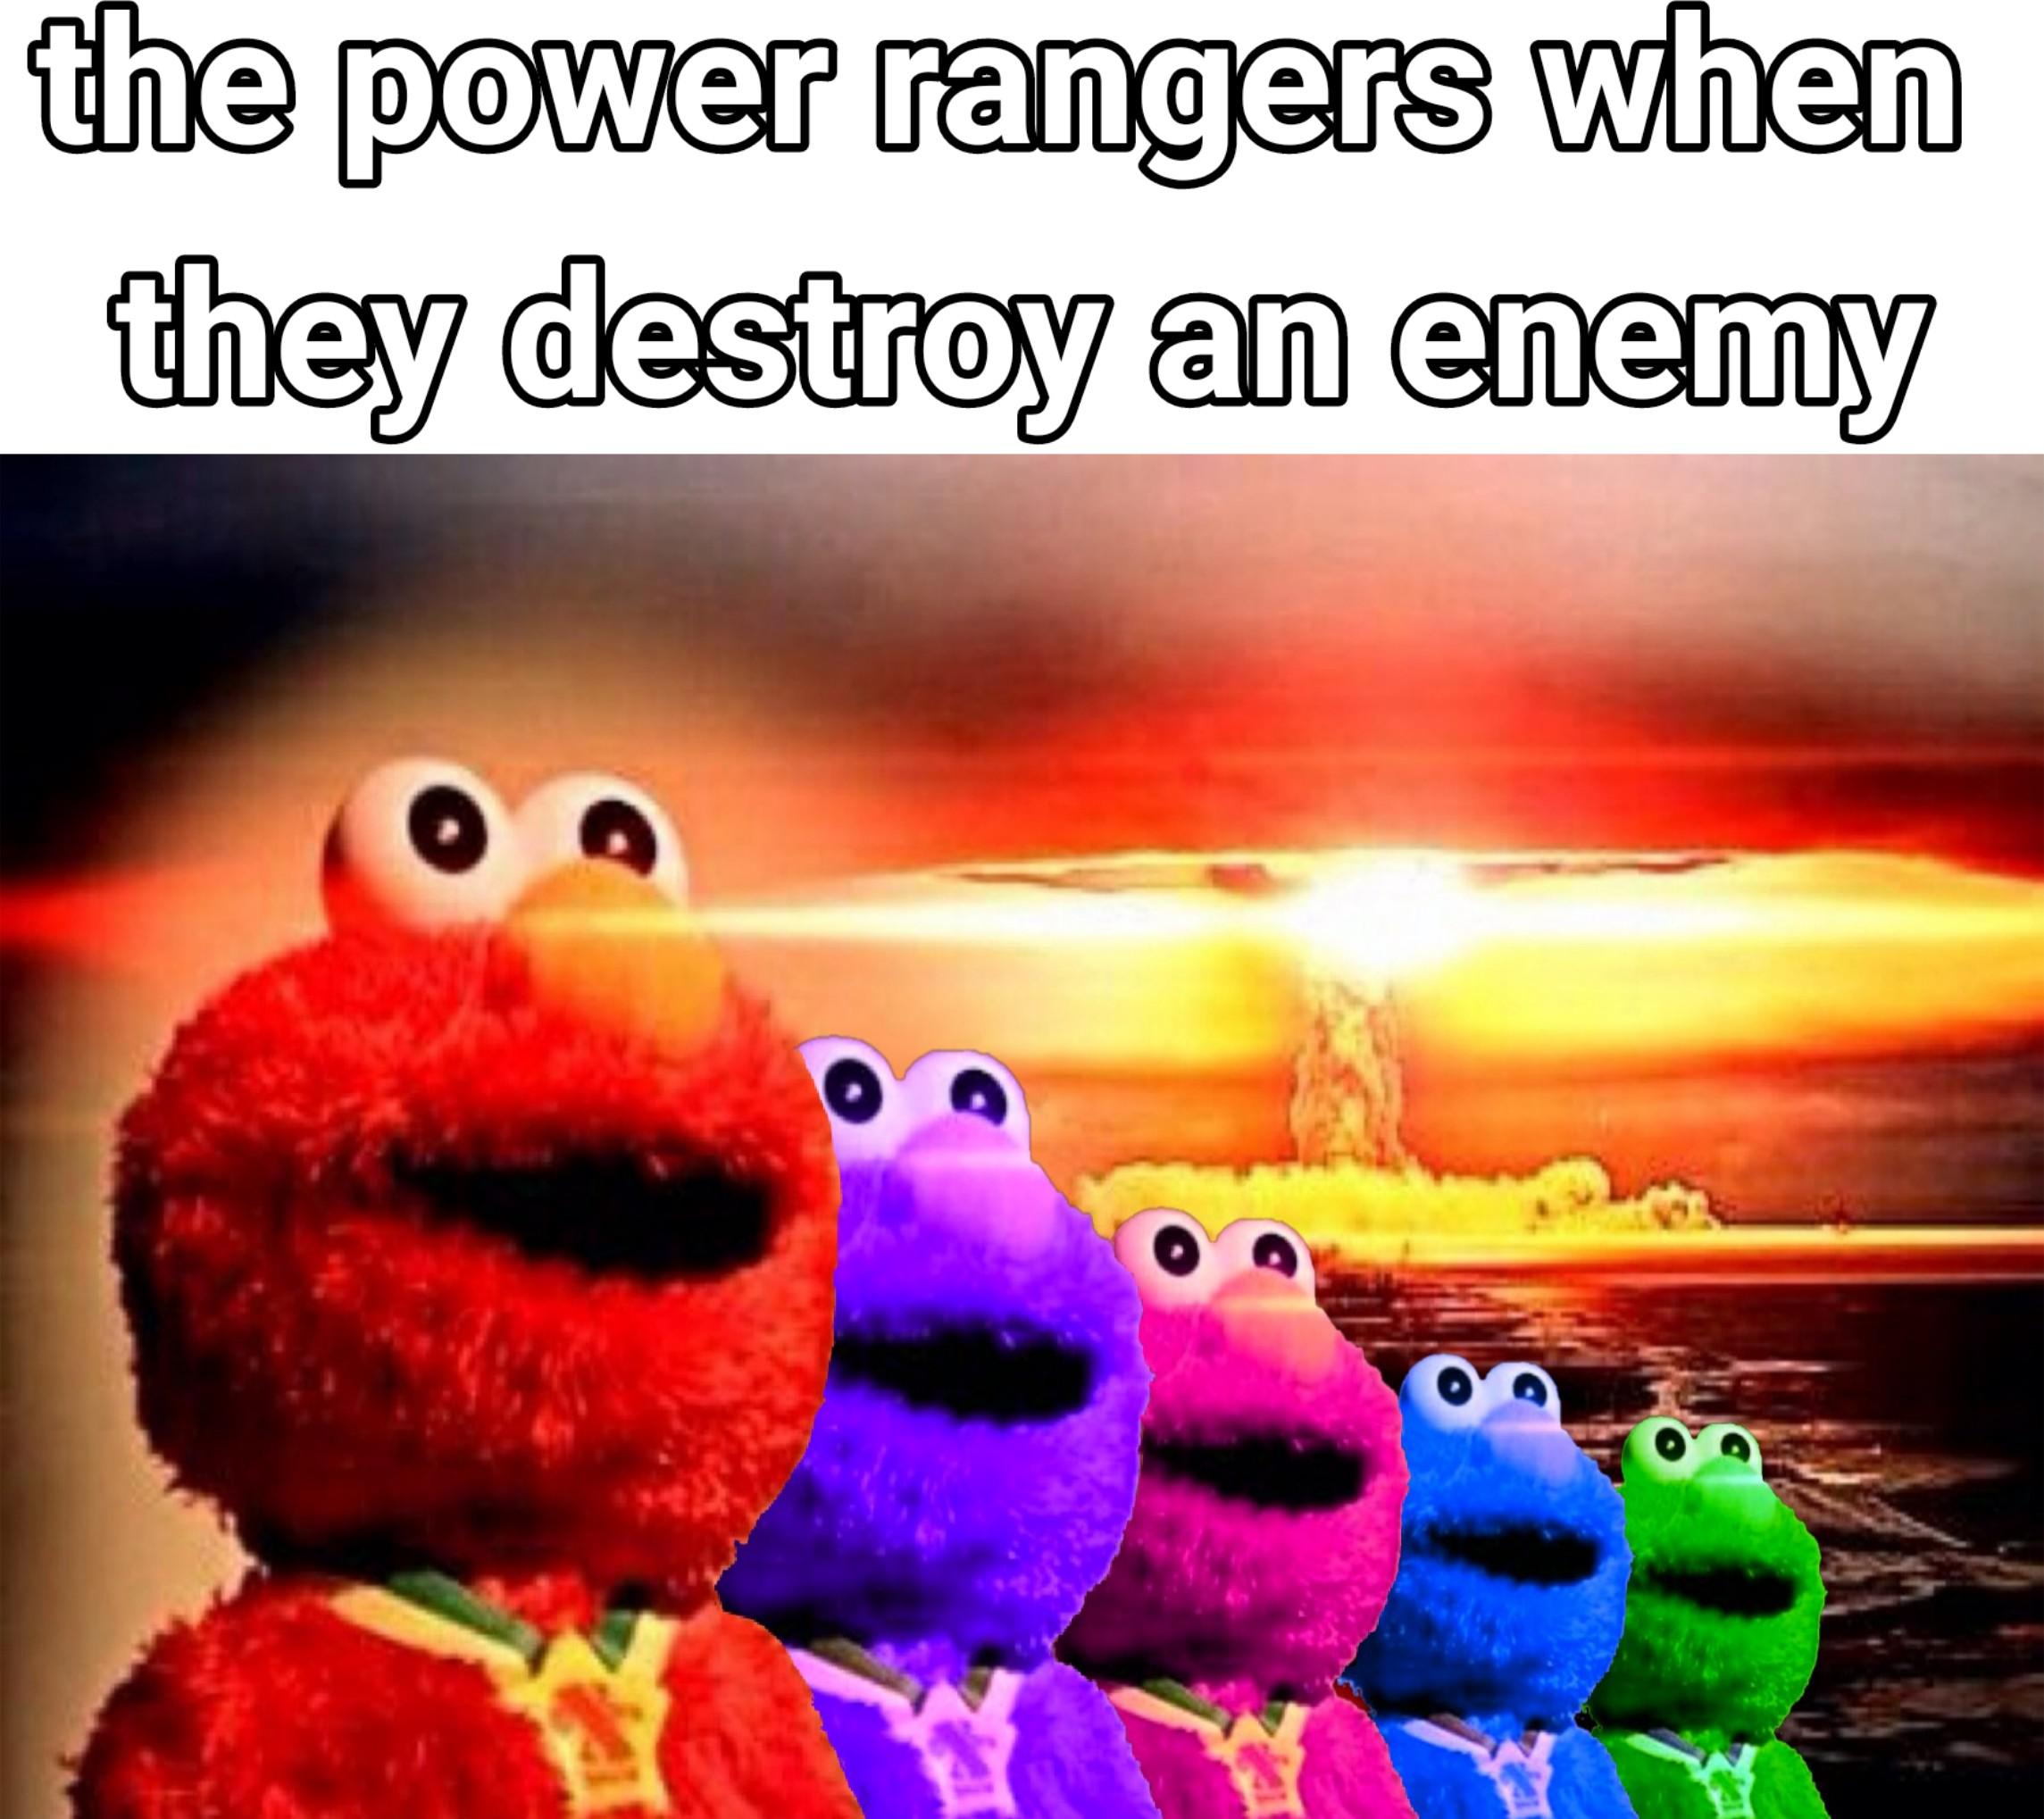 nuclear bomb meme - the power rangers when they destroy an enemy